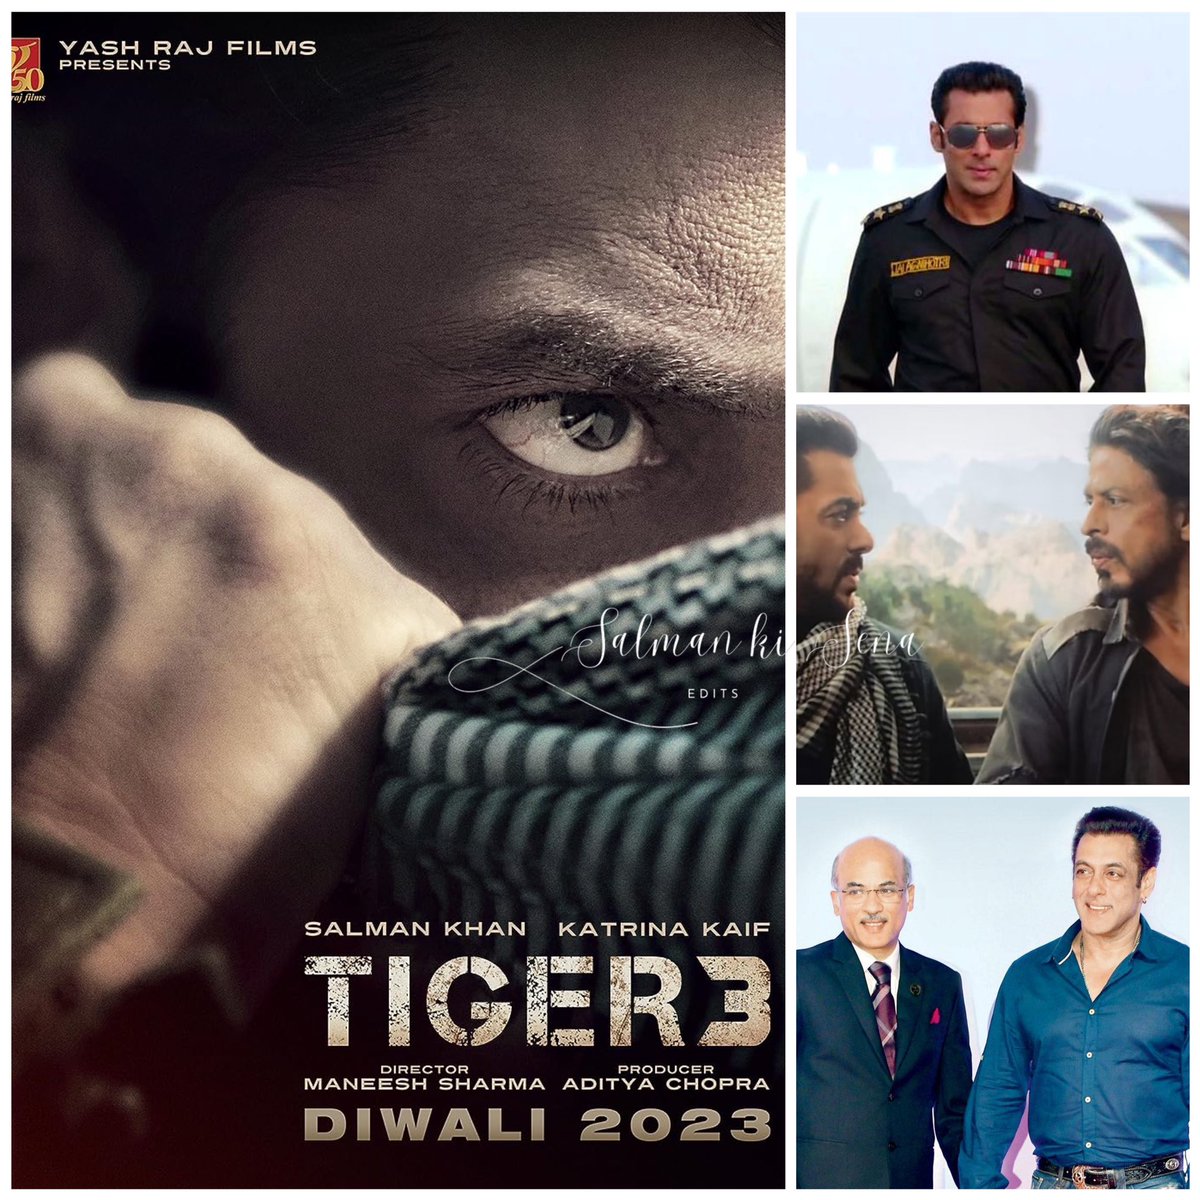 #SalmanKhan's Upcoming films after  #Tiger3,' 

-He will be portraying a paramilitary officer in #Vishnuvardhan's project.

-Tiger vs. Pathaan,' featuring Megastar Salman Khan & #SRK and is planned to commence filming by April 2024.

-#SoorajBarjatya plans to start shooting the…